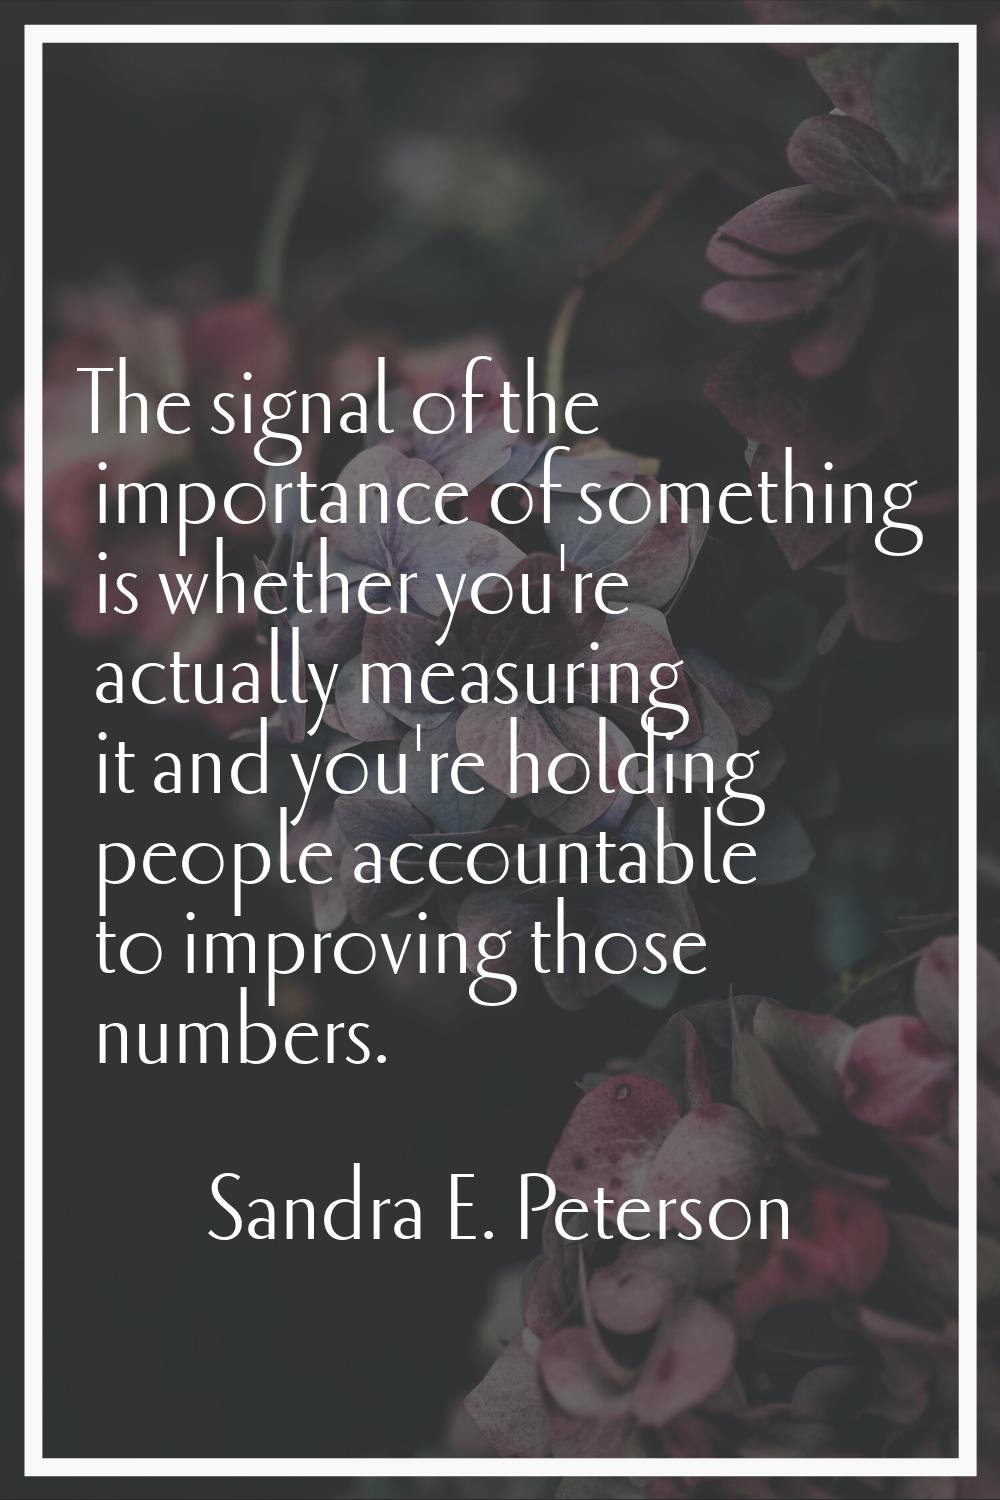 The signal of the importance of something is whether you're actually measuring it and you're holdin